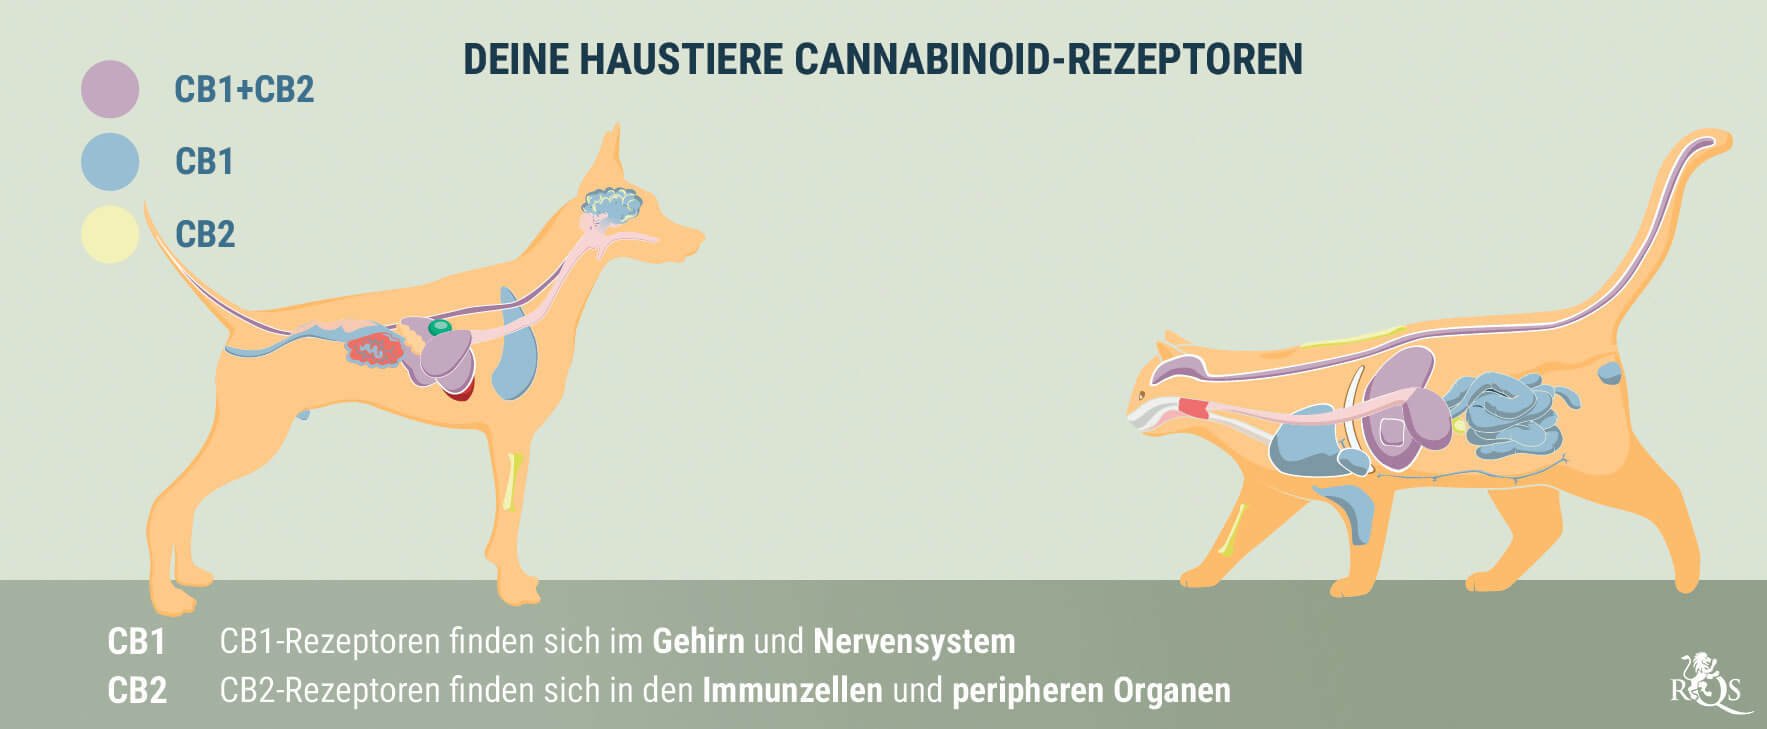 Medical Cannabis for Dogs and Cats